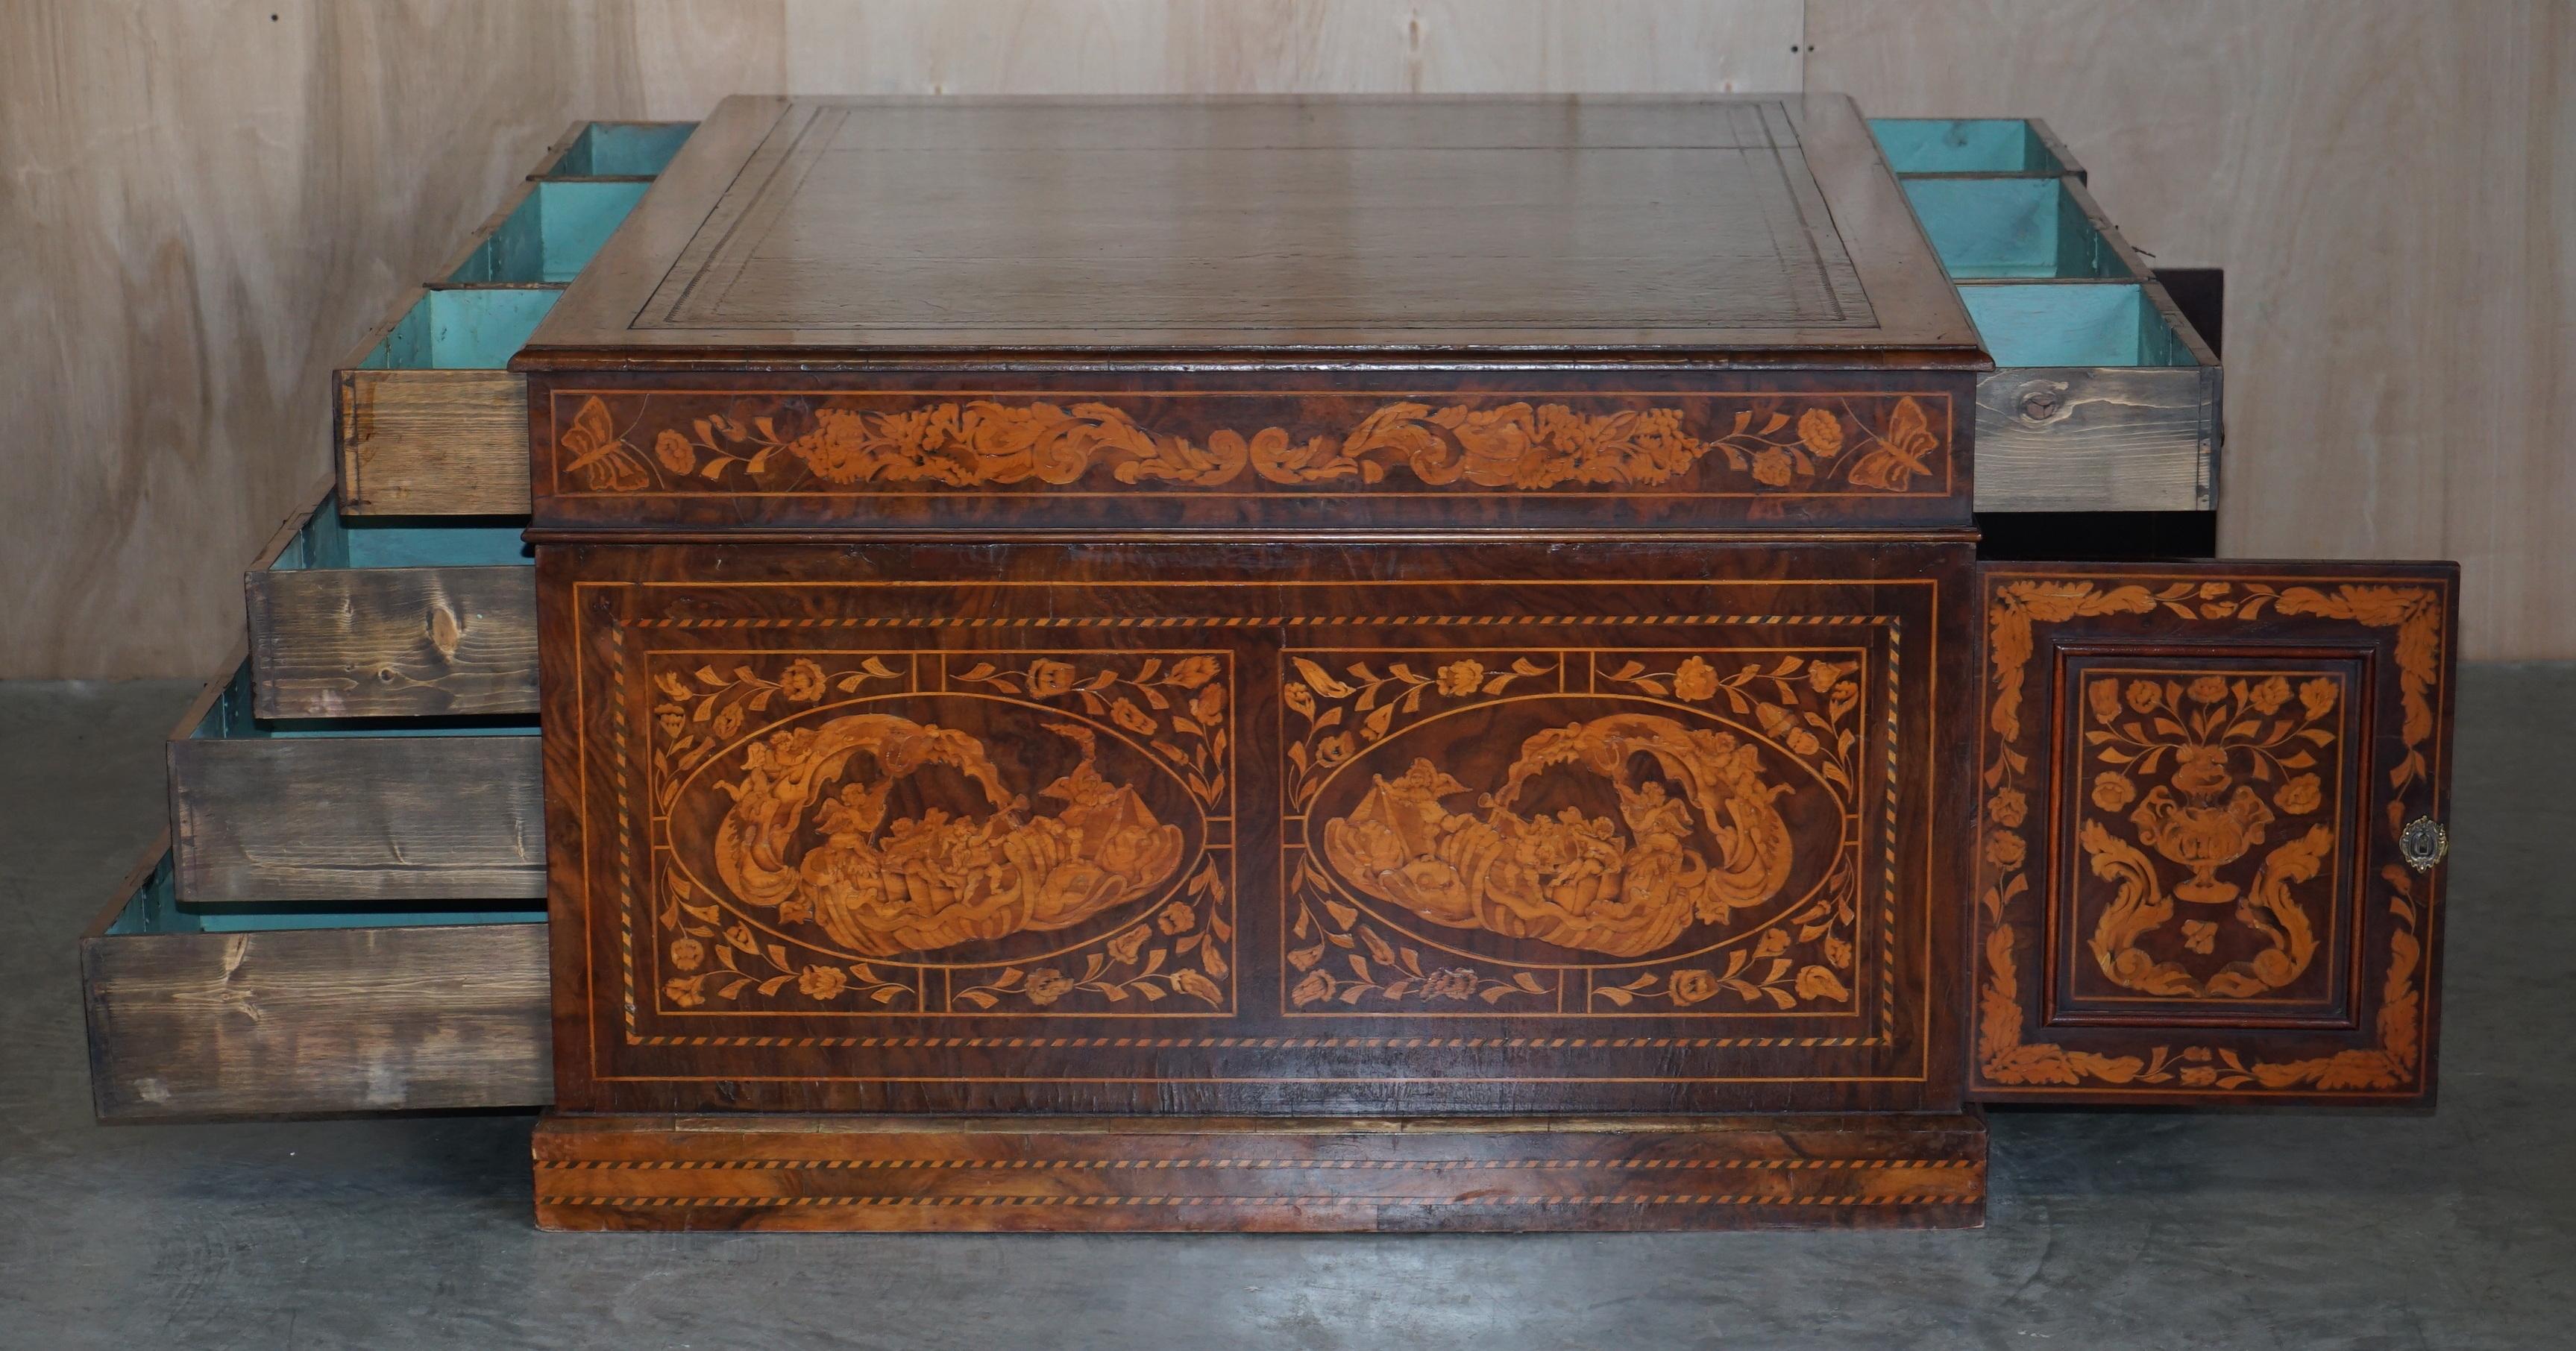 Antique Restored Dutch Marquetry Inlaid Double Sided Twin Pedestal Partners Desk For Sale 8